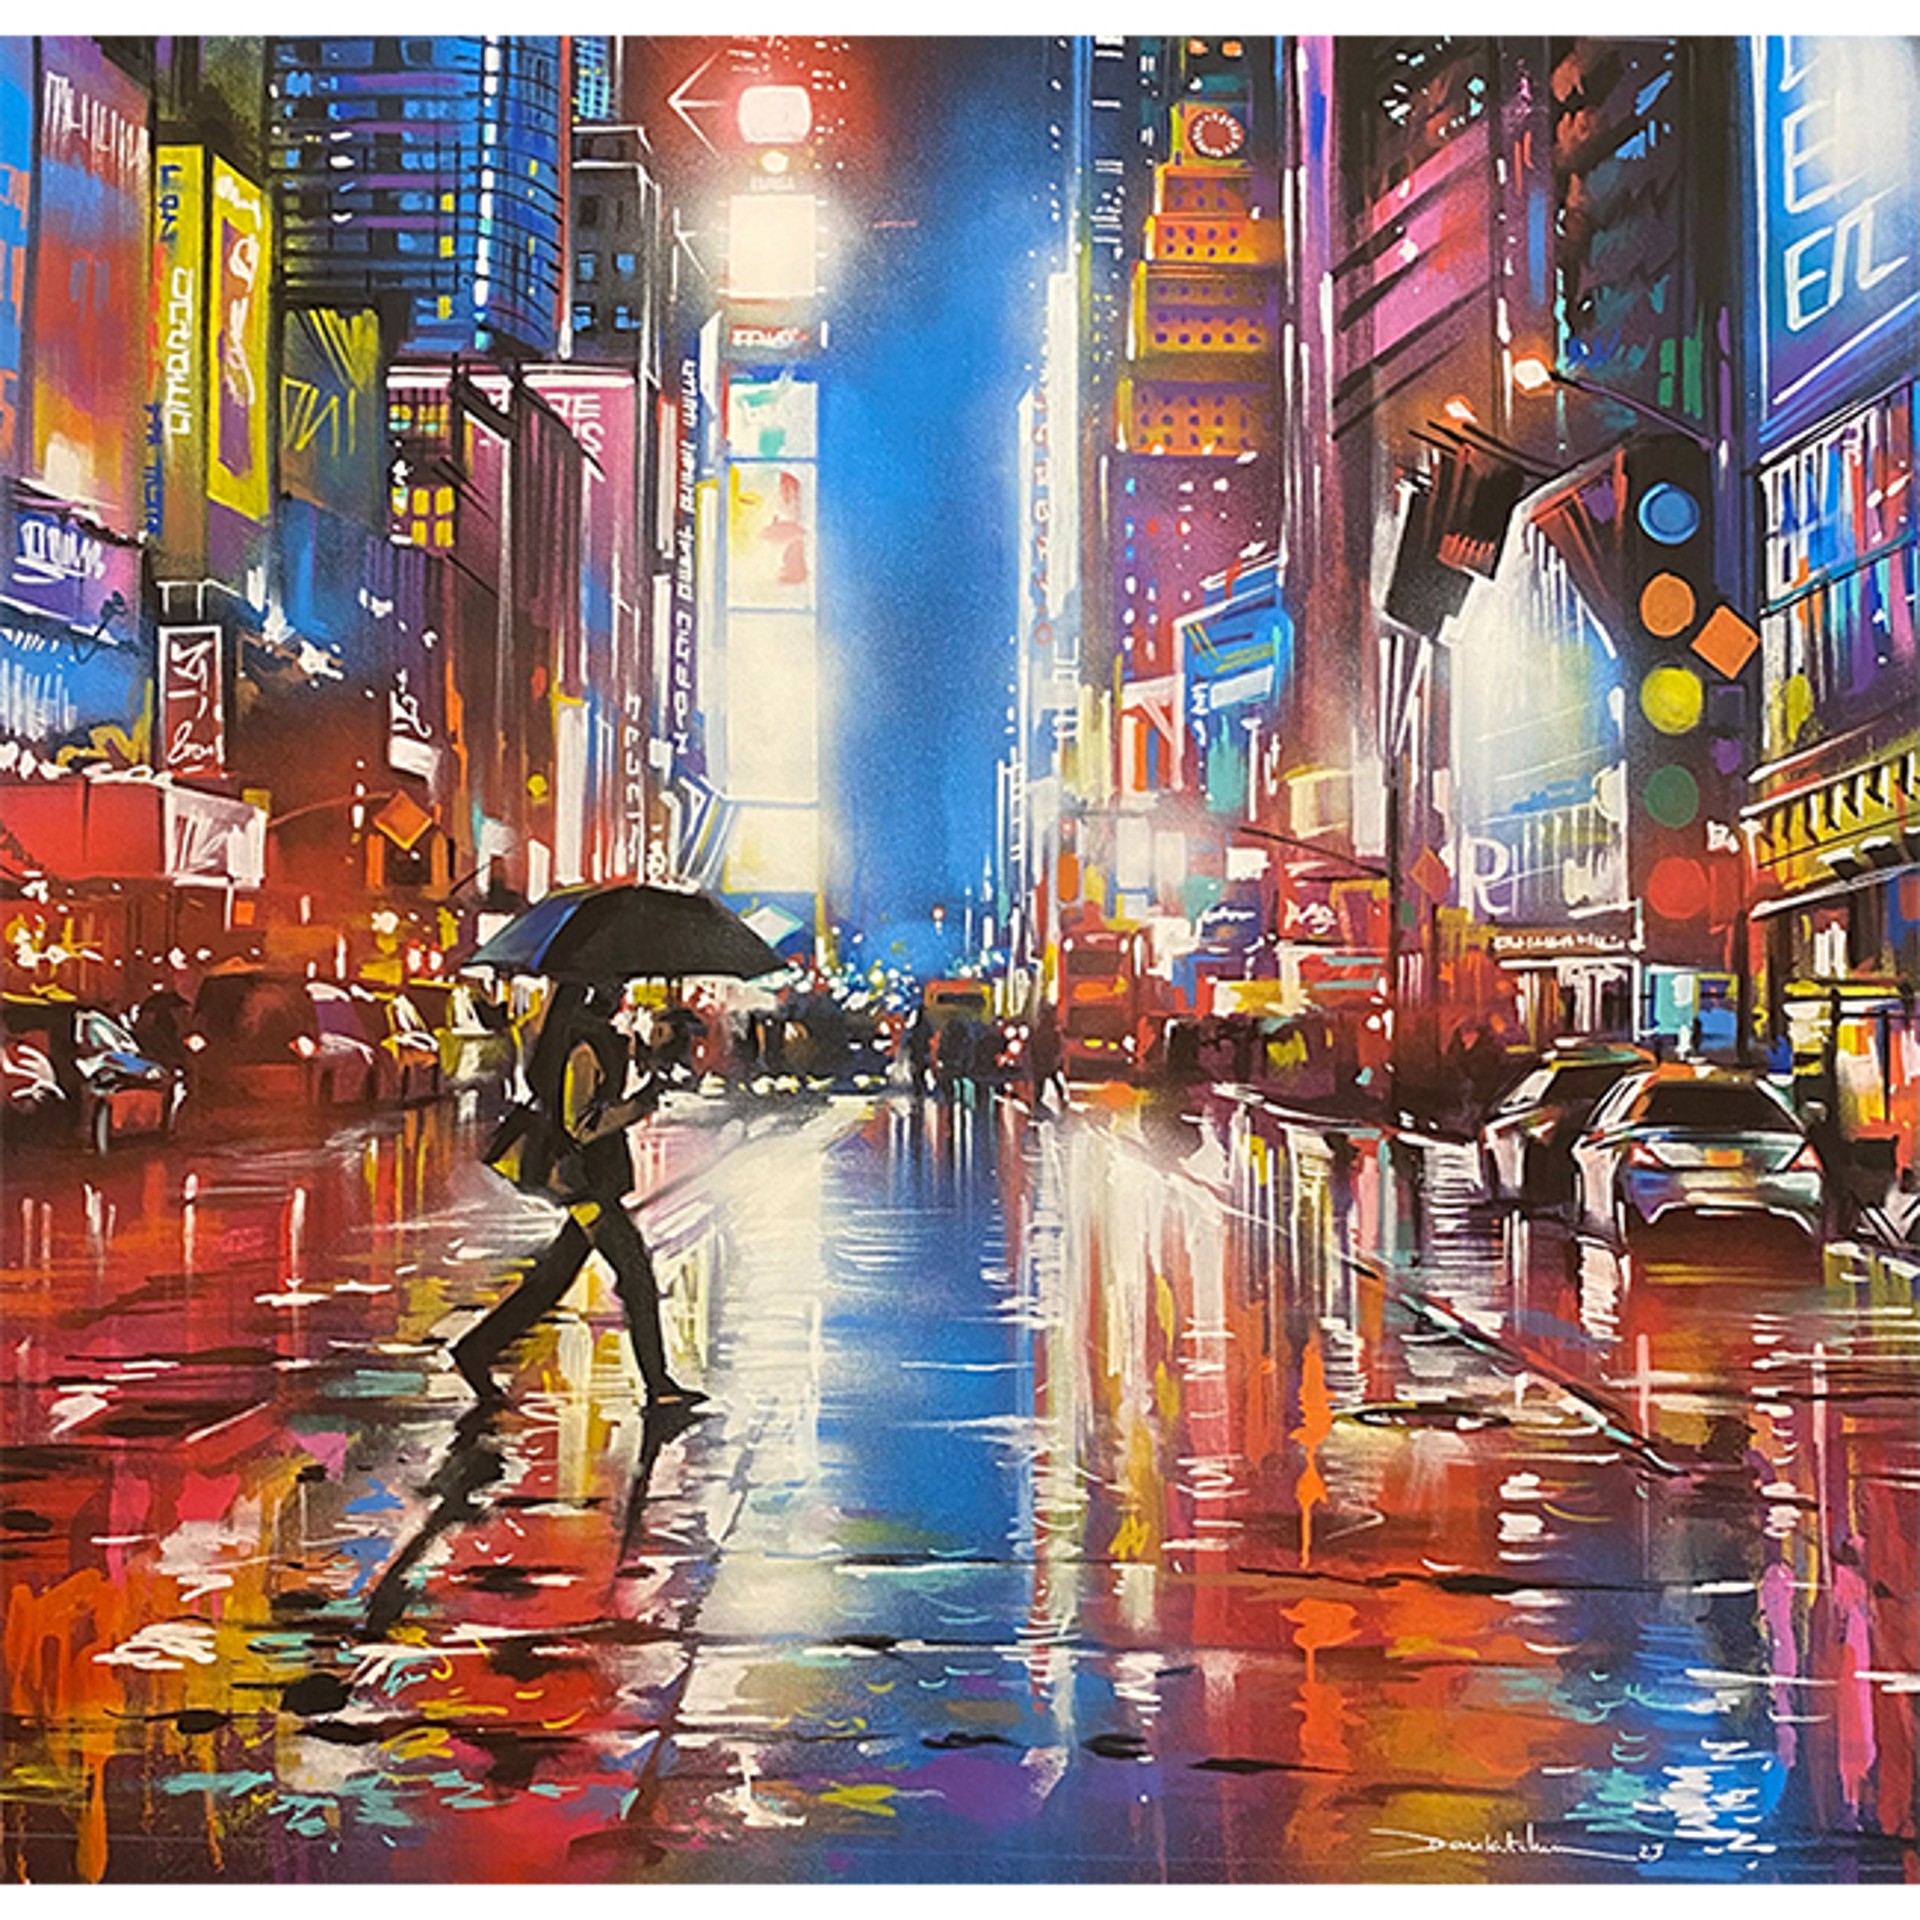 Times Square by Dan Kitchener